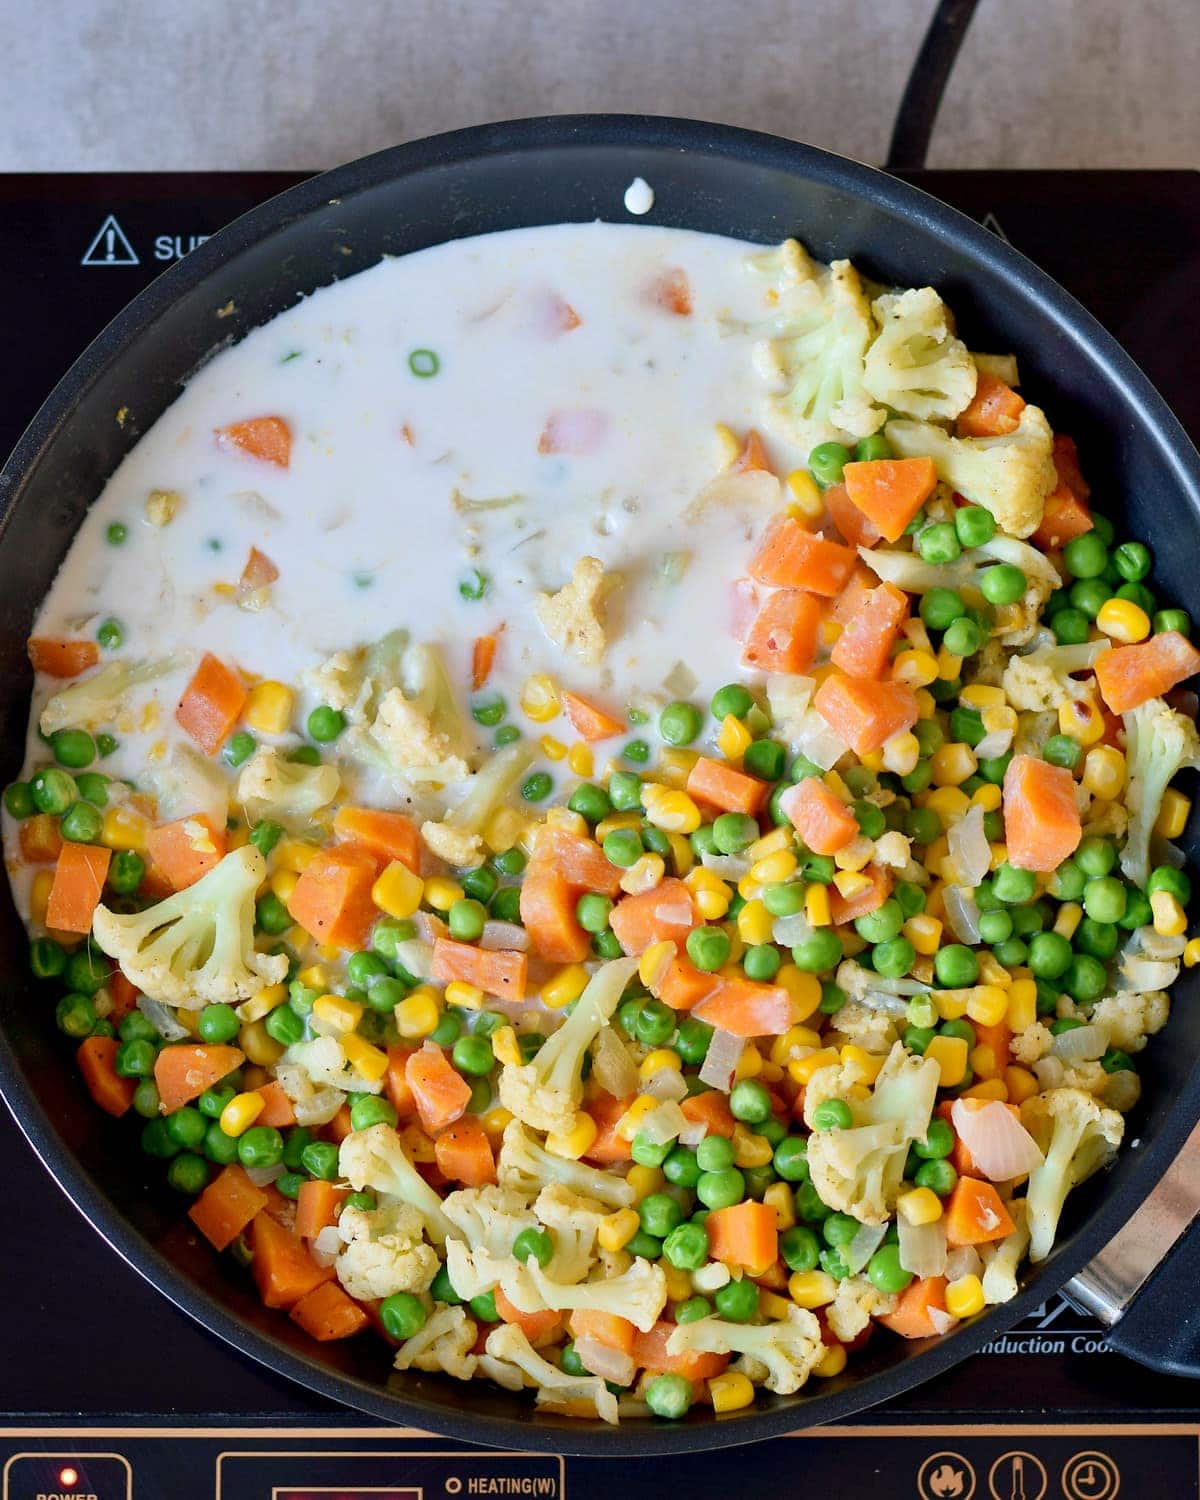 Veggies with plant-based cream in a pan